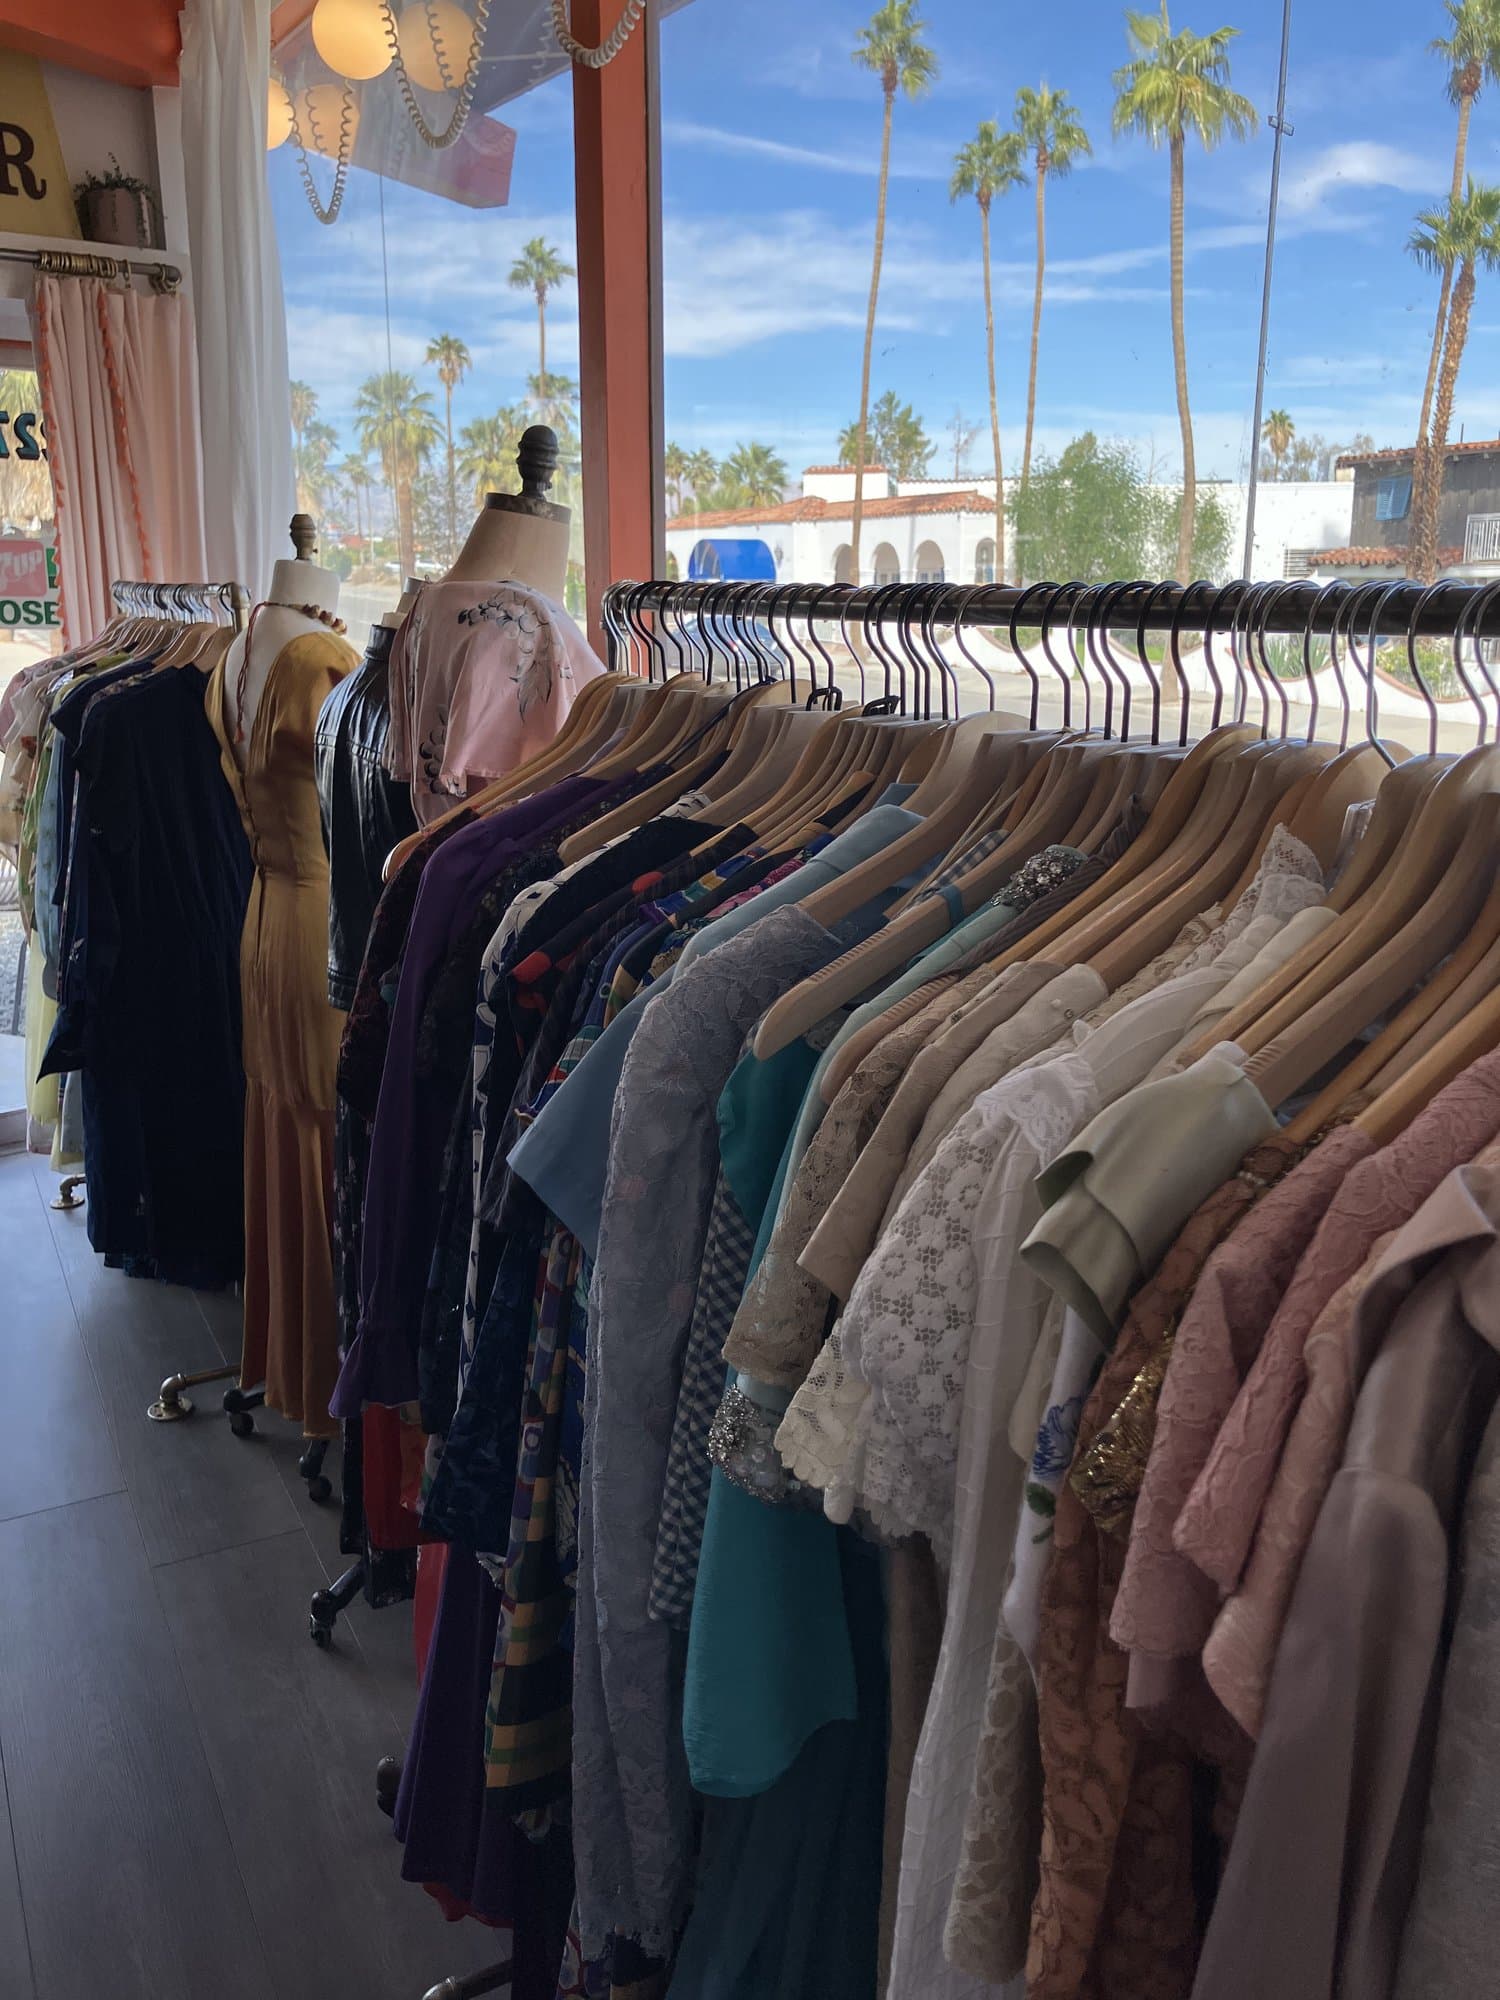 An interior view of a boutique with racks of various colorful dresses and garments, two mannequin torsos displaying clothes at the end of the rack, and a sunny view of palm trees through the front window.